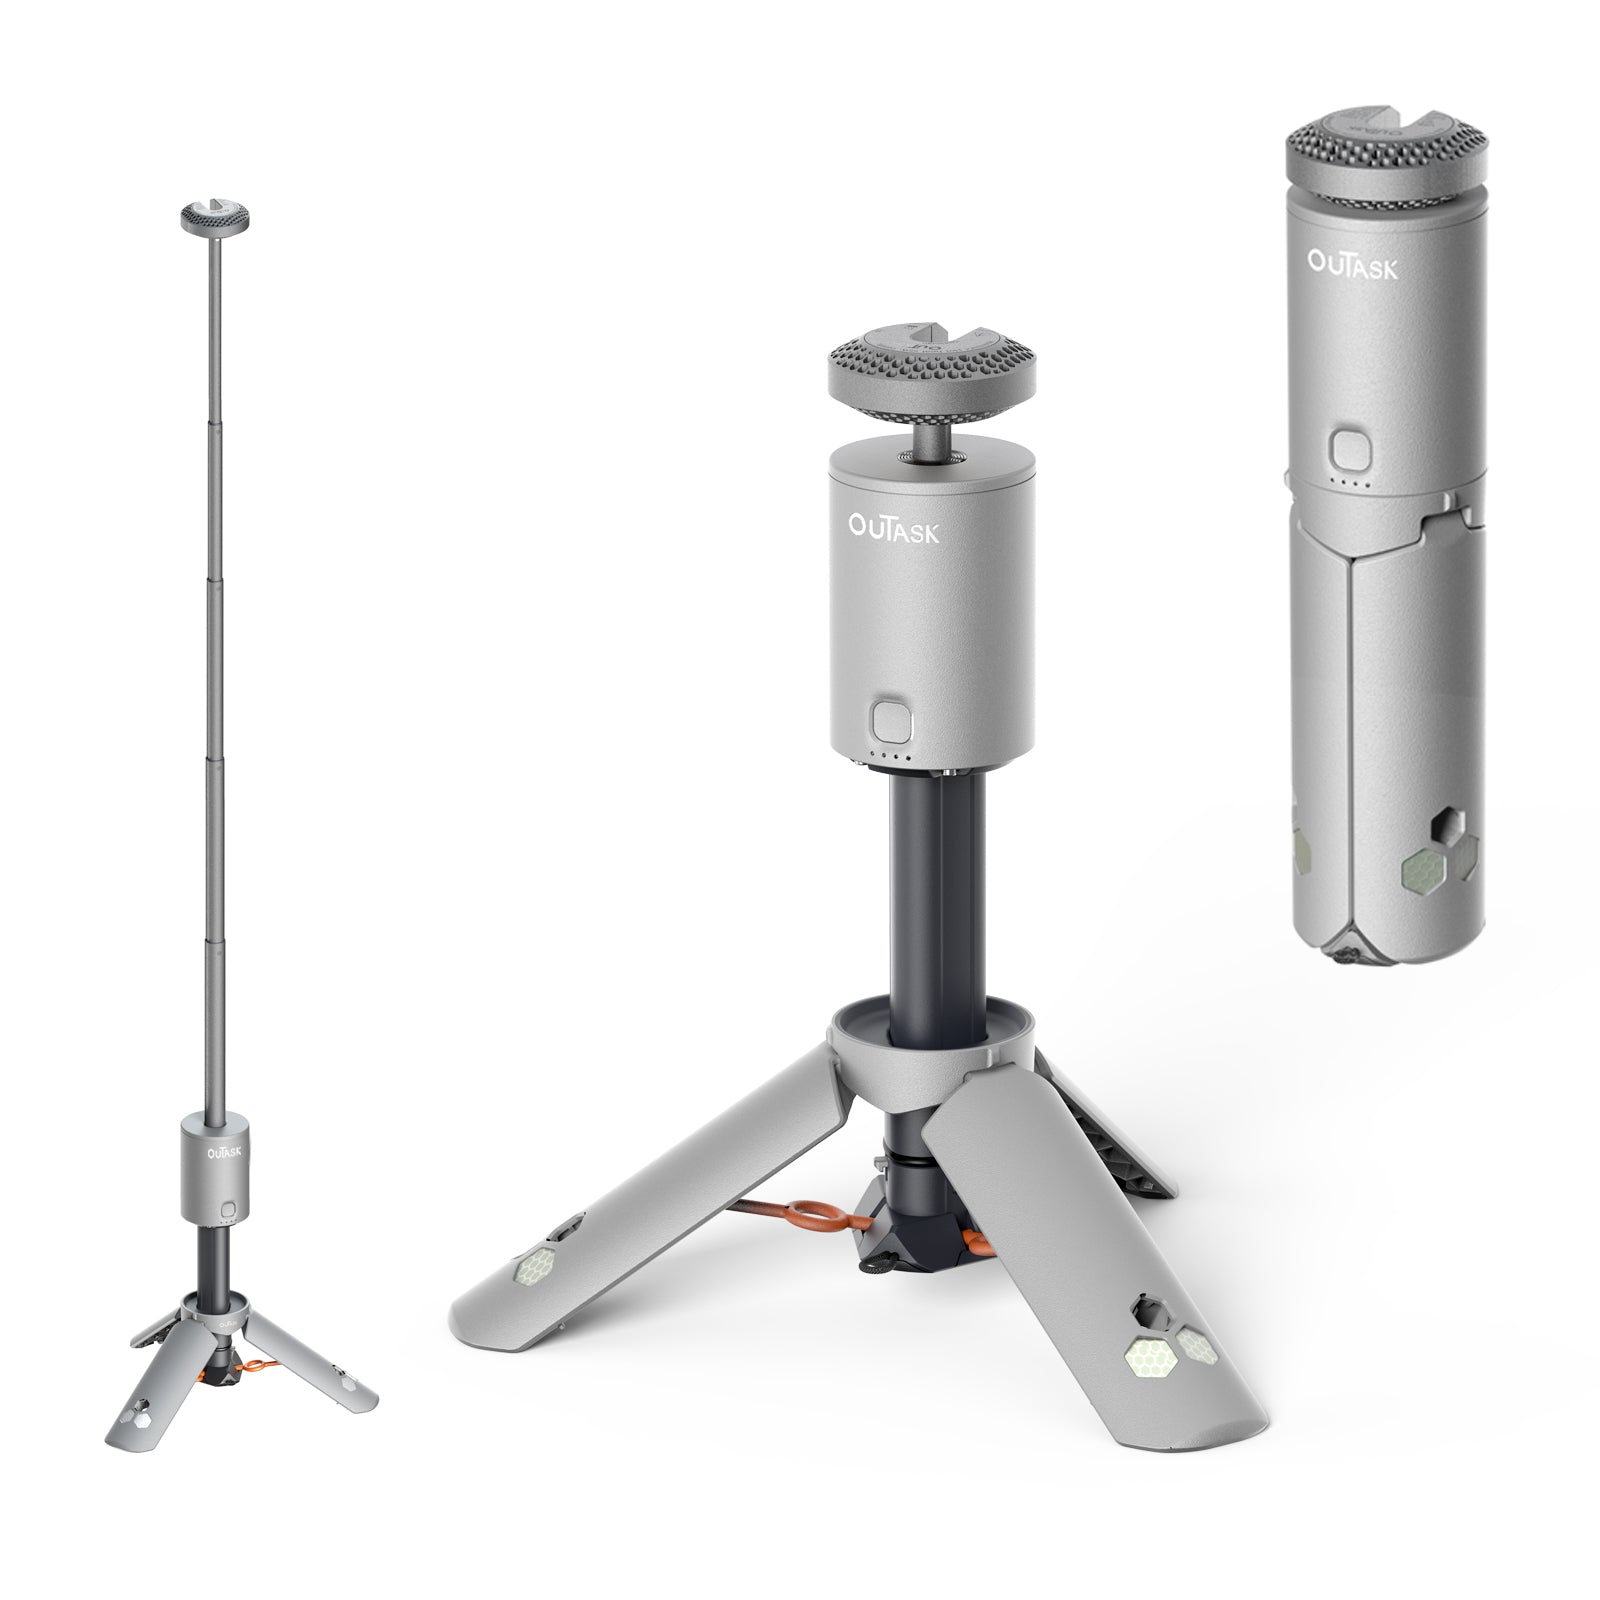 ouTask Ultra Portable Camp Light with Telescopic Pole and Magnetic Tripod